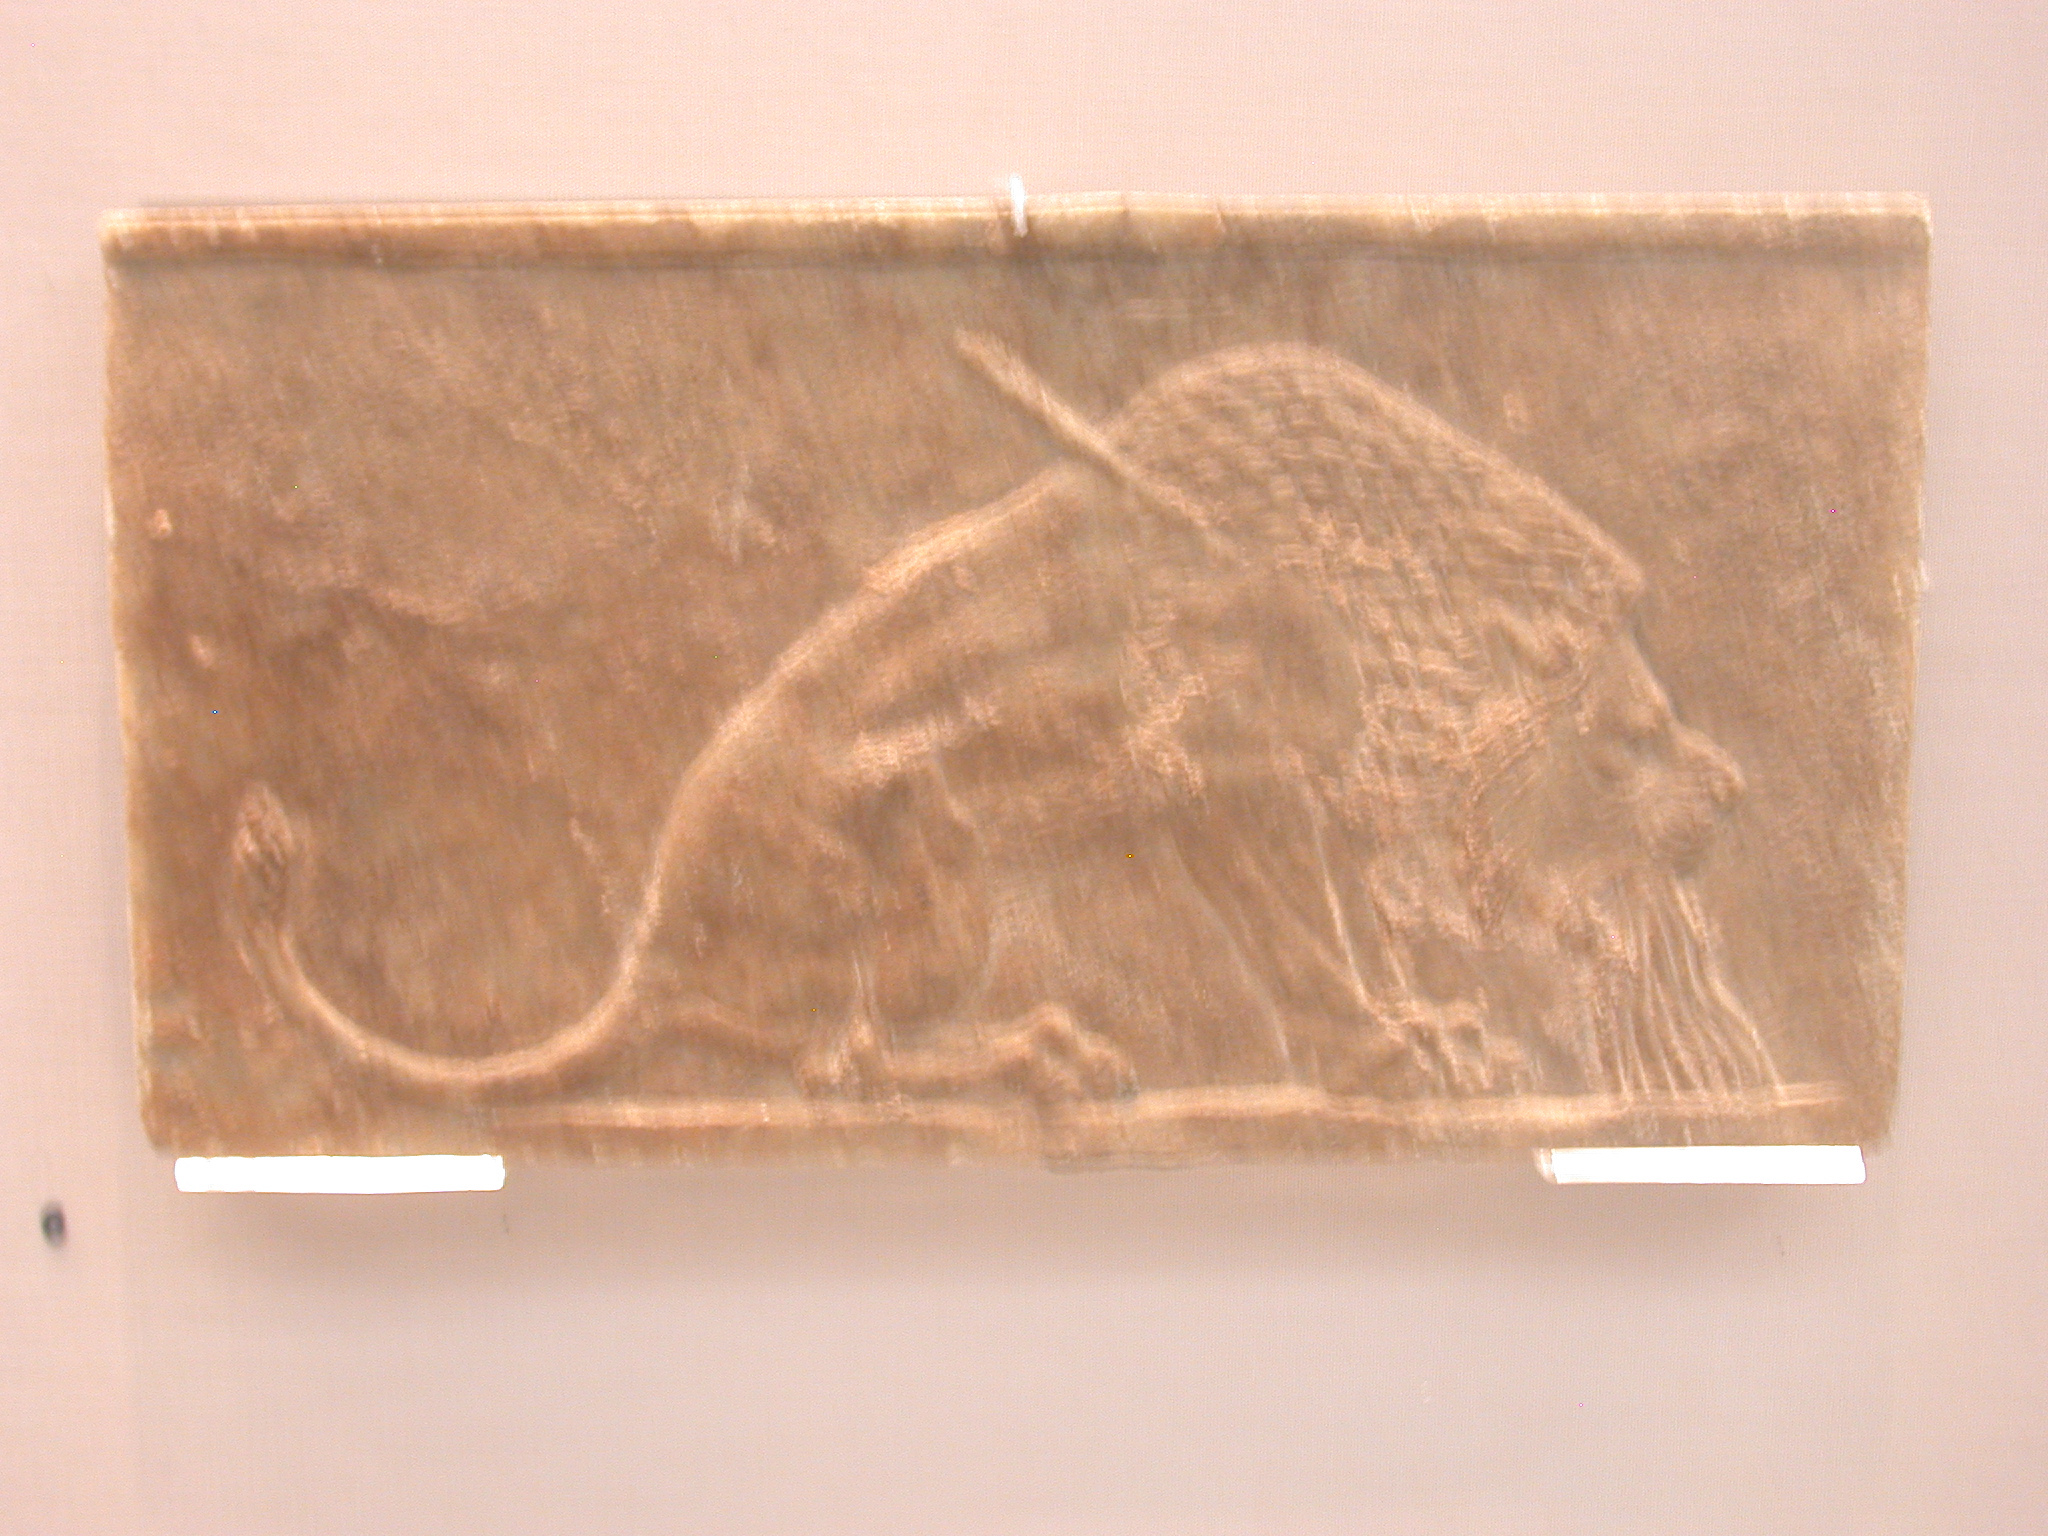 The Dying Lion, Gypsum Wall Panel, About 645 BCE, Palace of Ashurbanipal, Nineveh, Assyria, in British Museum, London, England